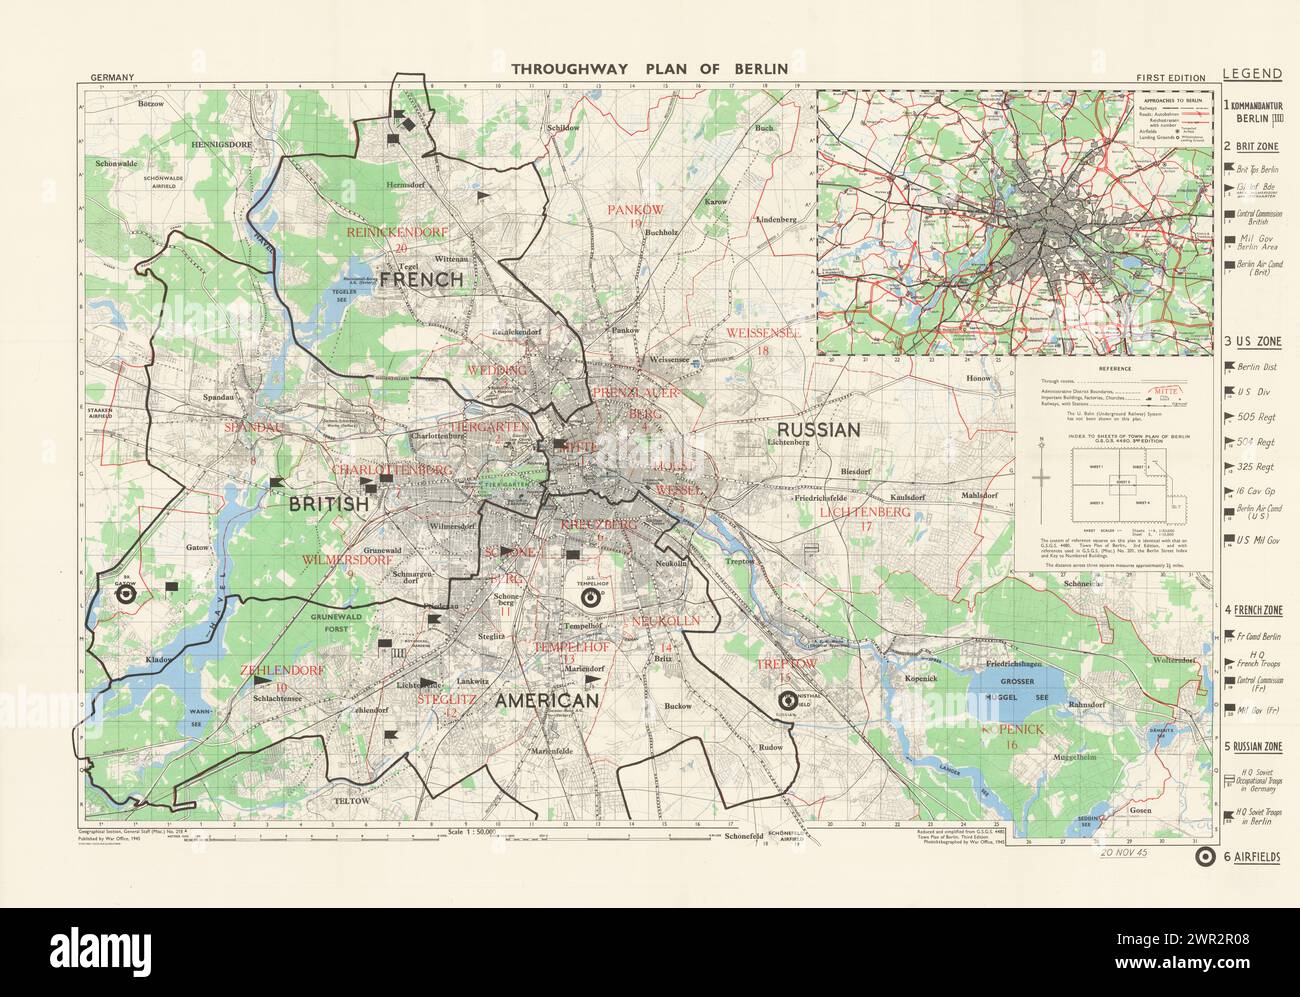 Vintage Berlin War. Second World War -- Occupation of Berlin, Throughway Plan of Berlin.  by War Office, 1945.  Original city plan of Berlin published at the close of the Second World War, showing how the city was divided between French, English, American, and Russian sectors. Stock Photo